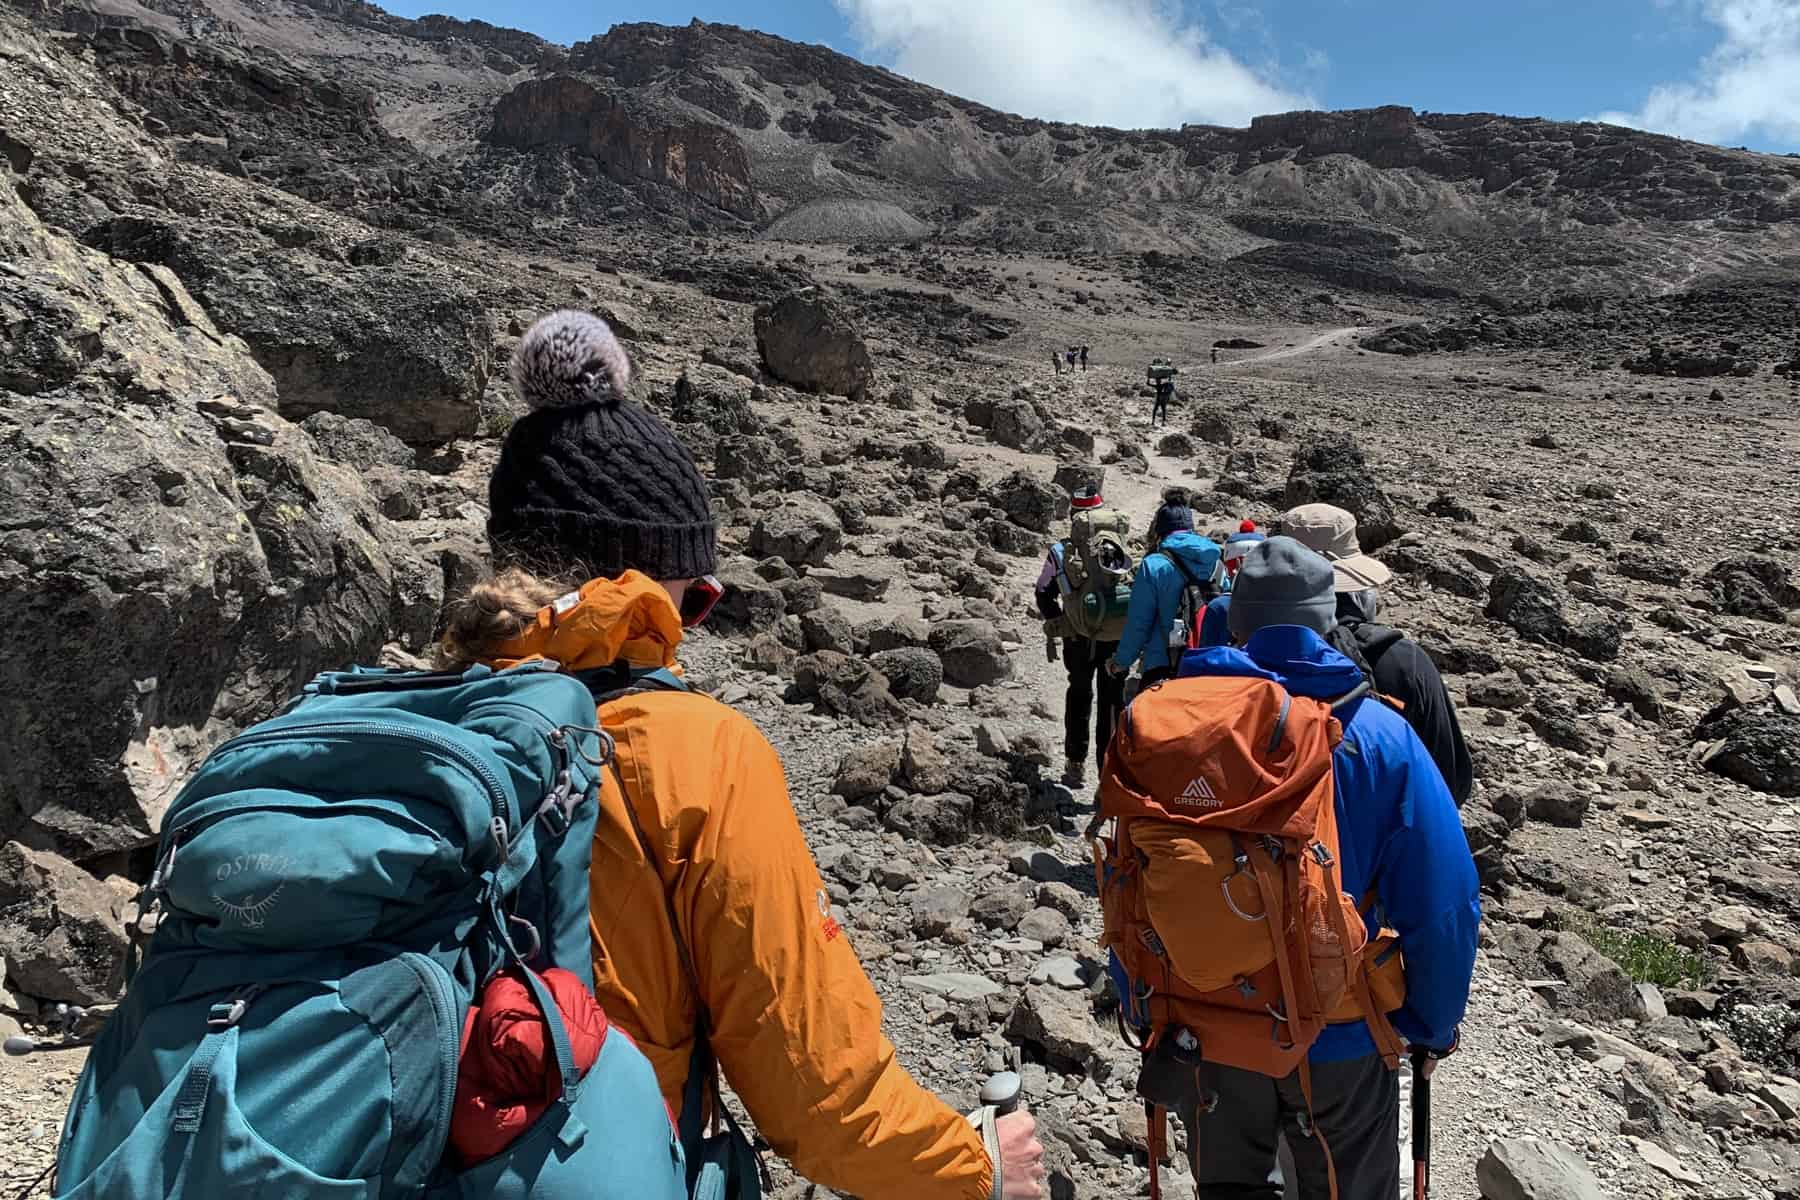 A woman in a orange jacket and blue backpack follows a line of other trekkers slowly climbing Kilimanjaro's dry, rocky scree.